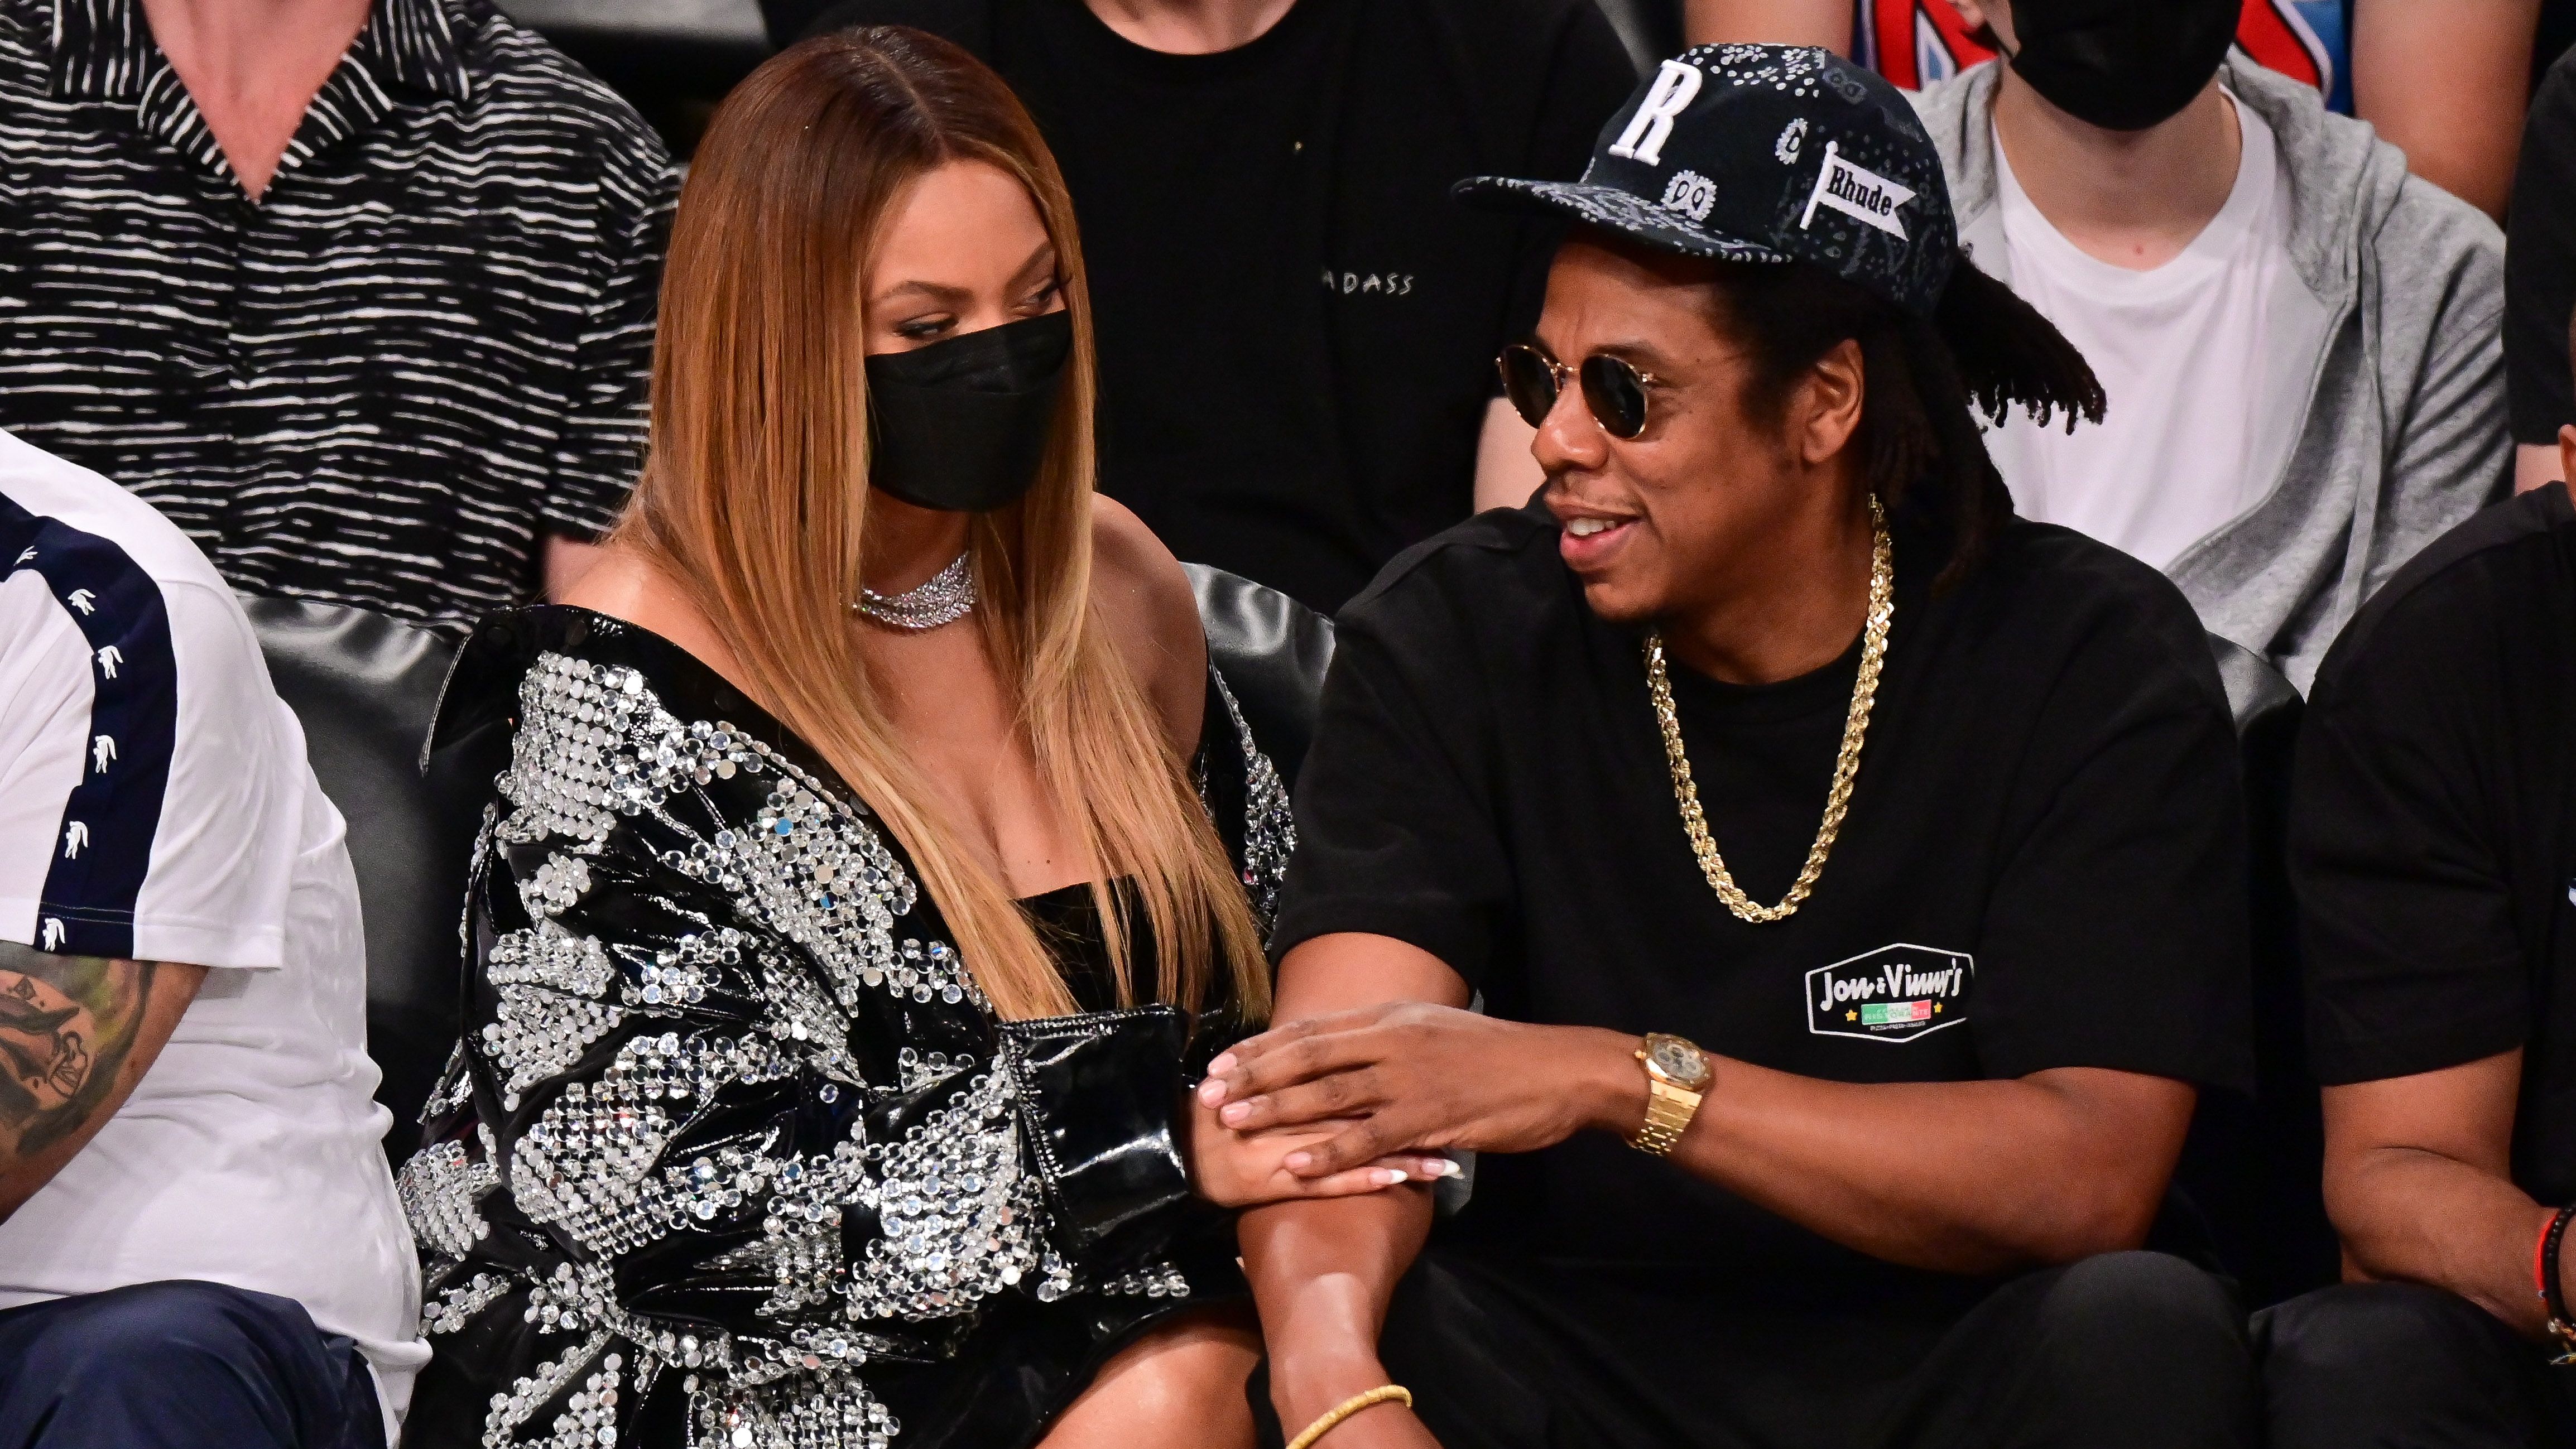 Beyoncé Wore a Chic Polka Dot Mini Dress On Date With Jay-Z In London